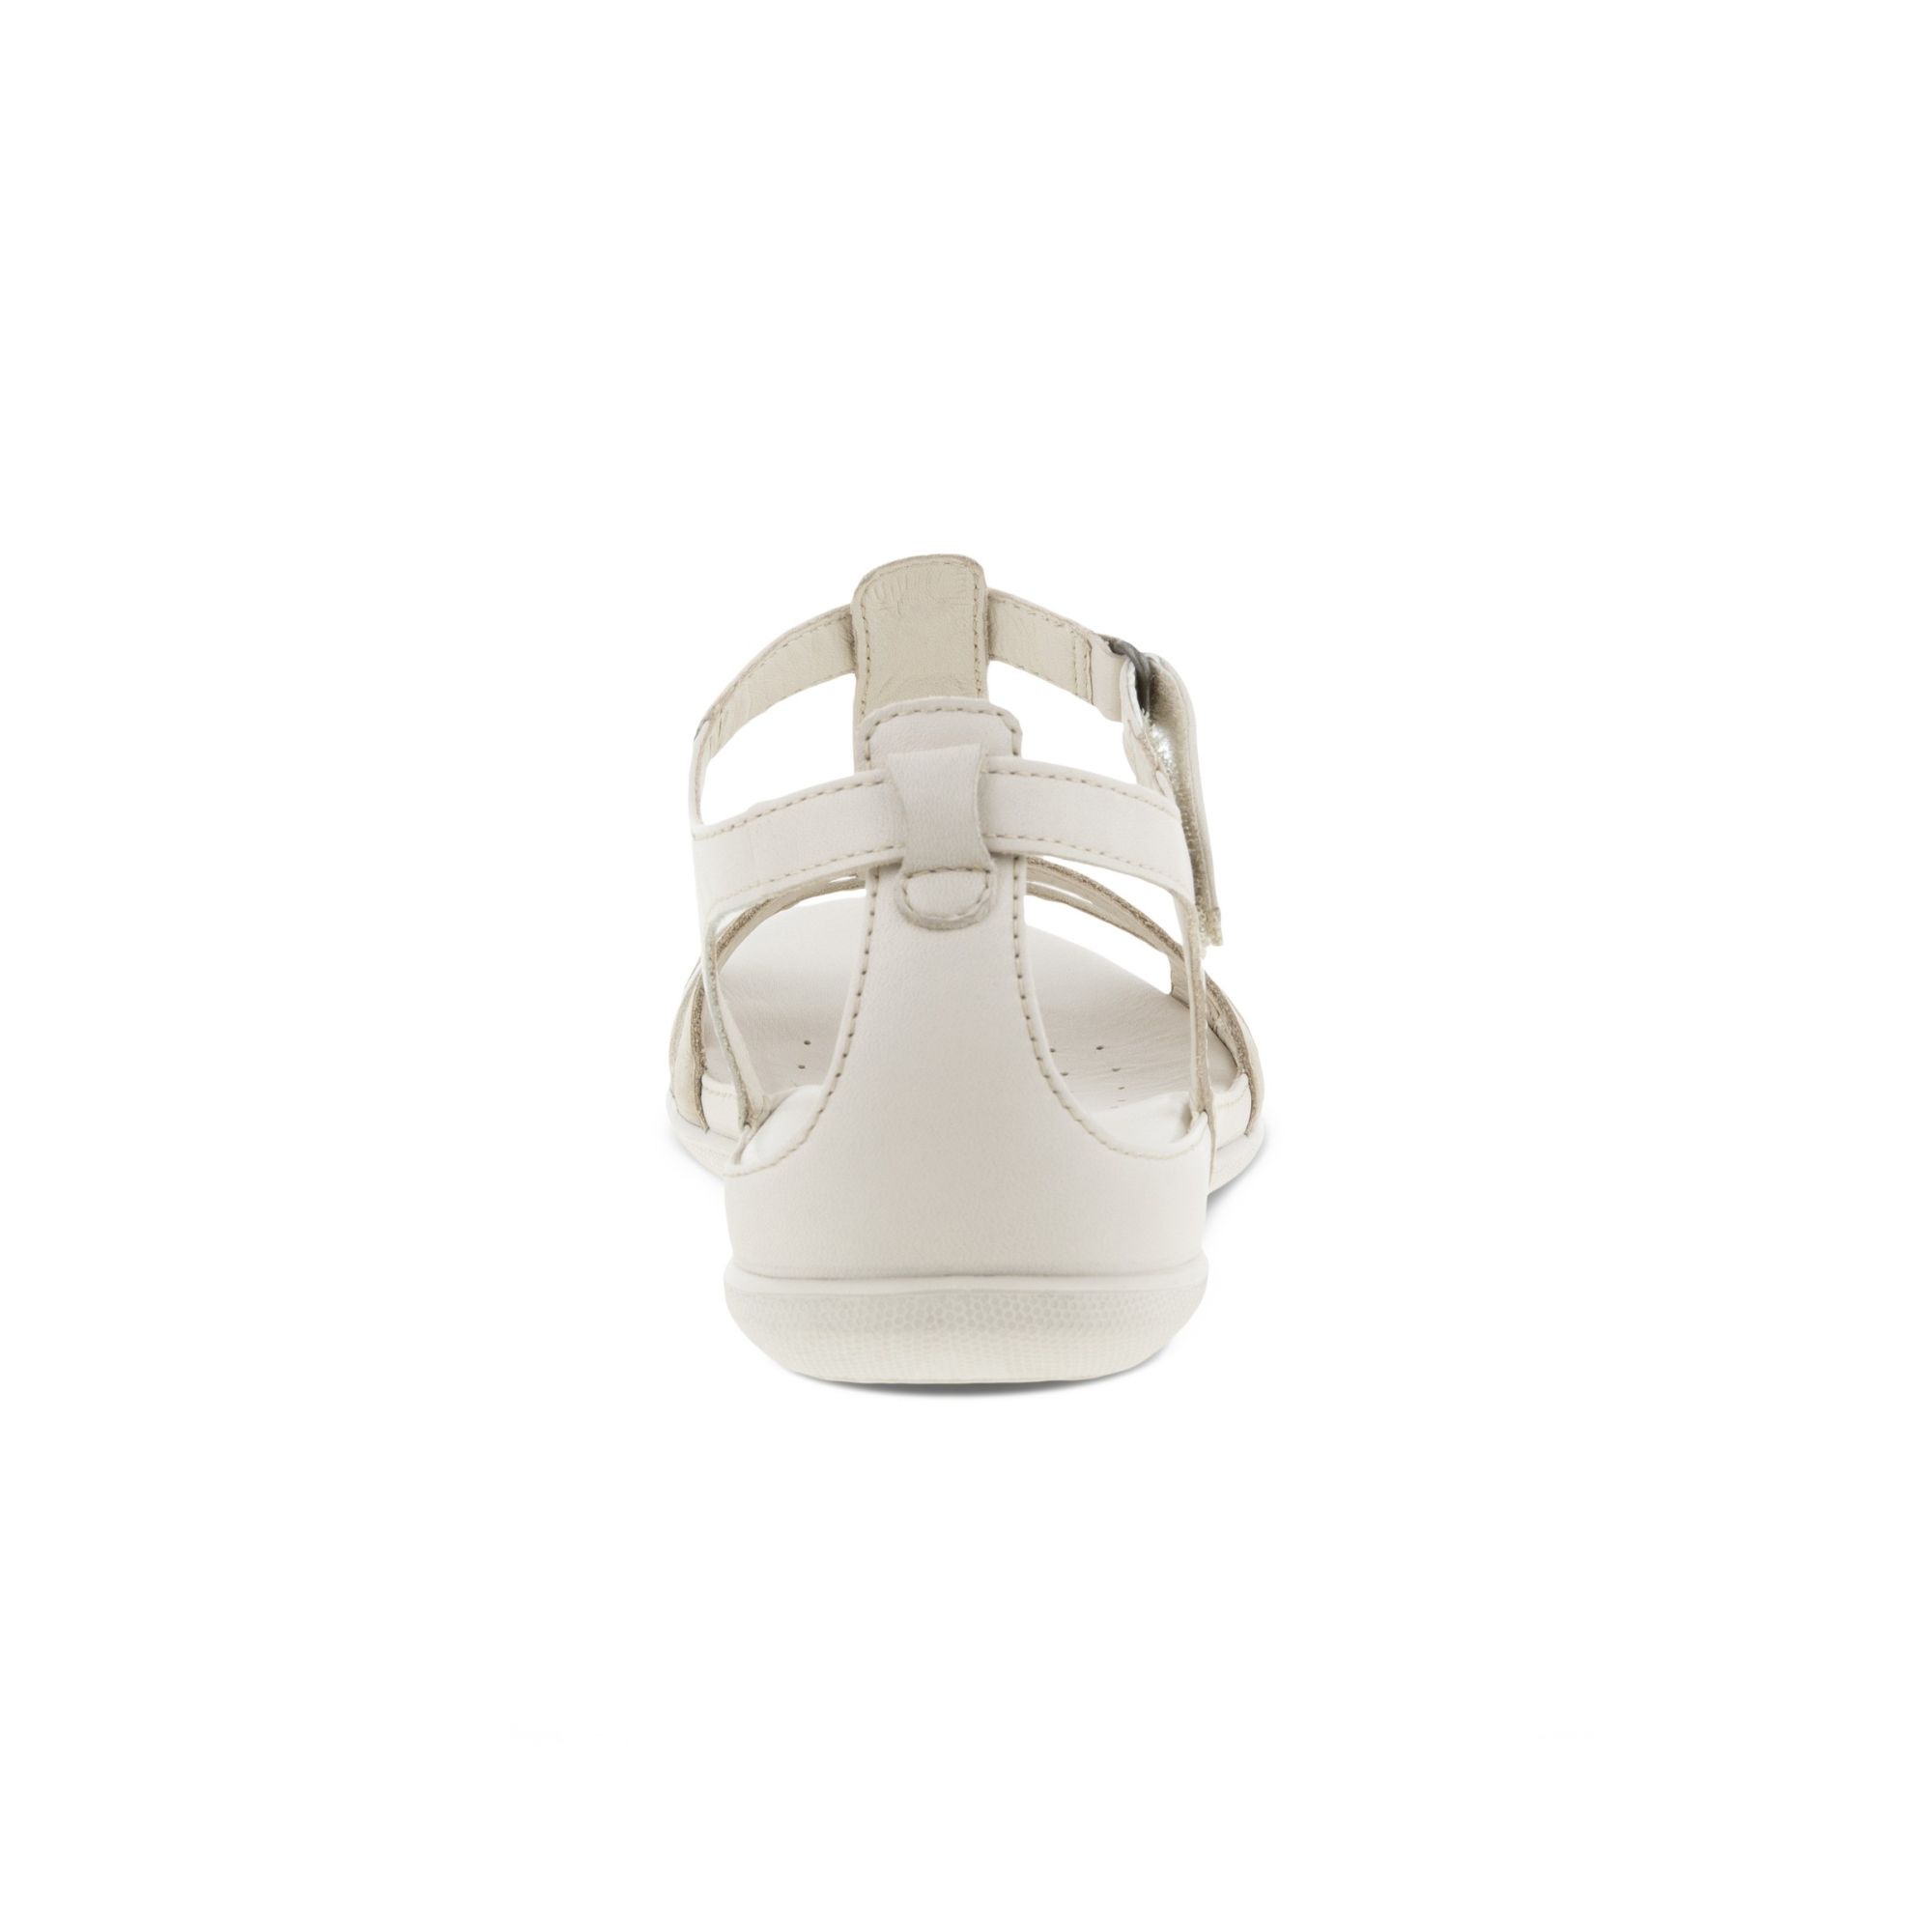 Ecco Flash T-Strap Sandal 43 - Products - Veryk Mall - Veryk Mall 